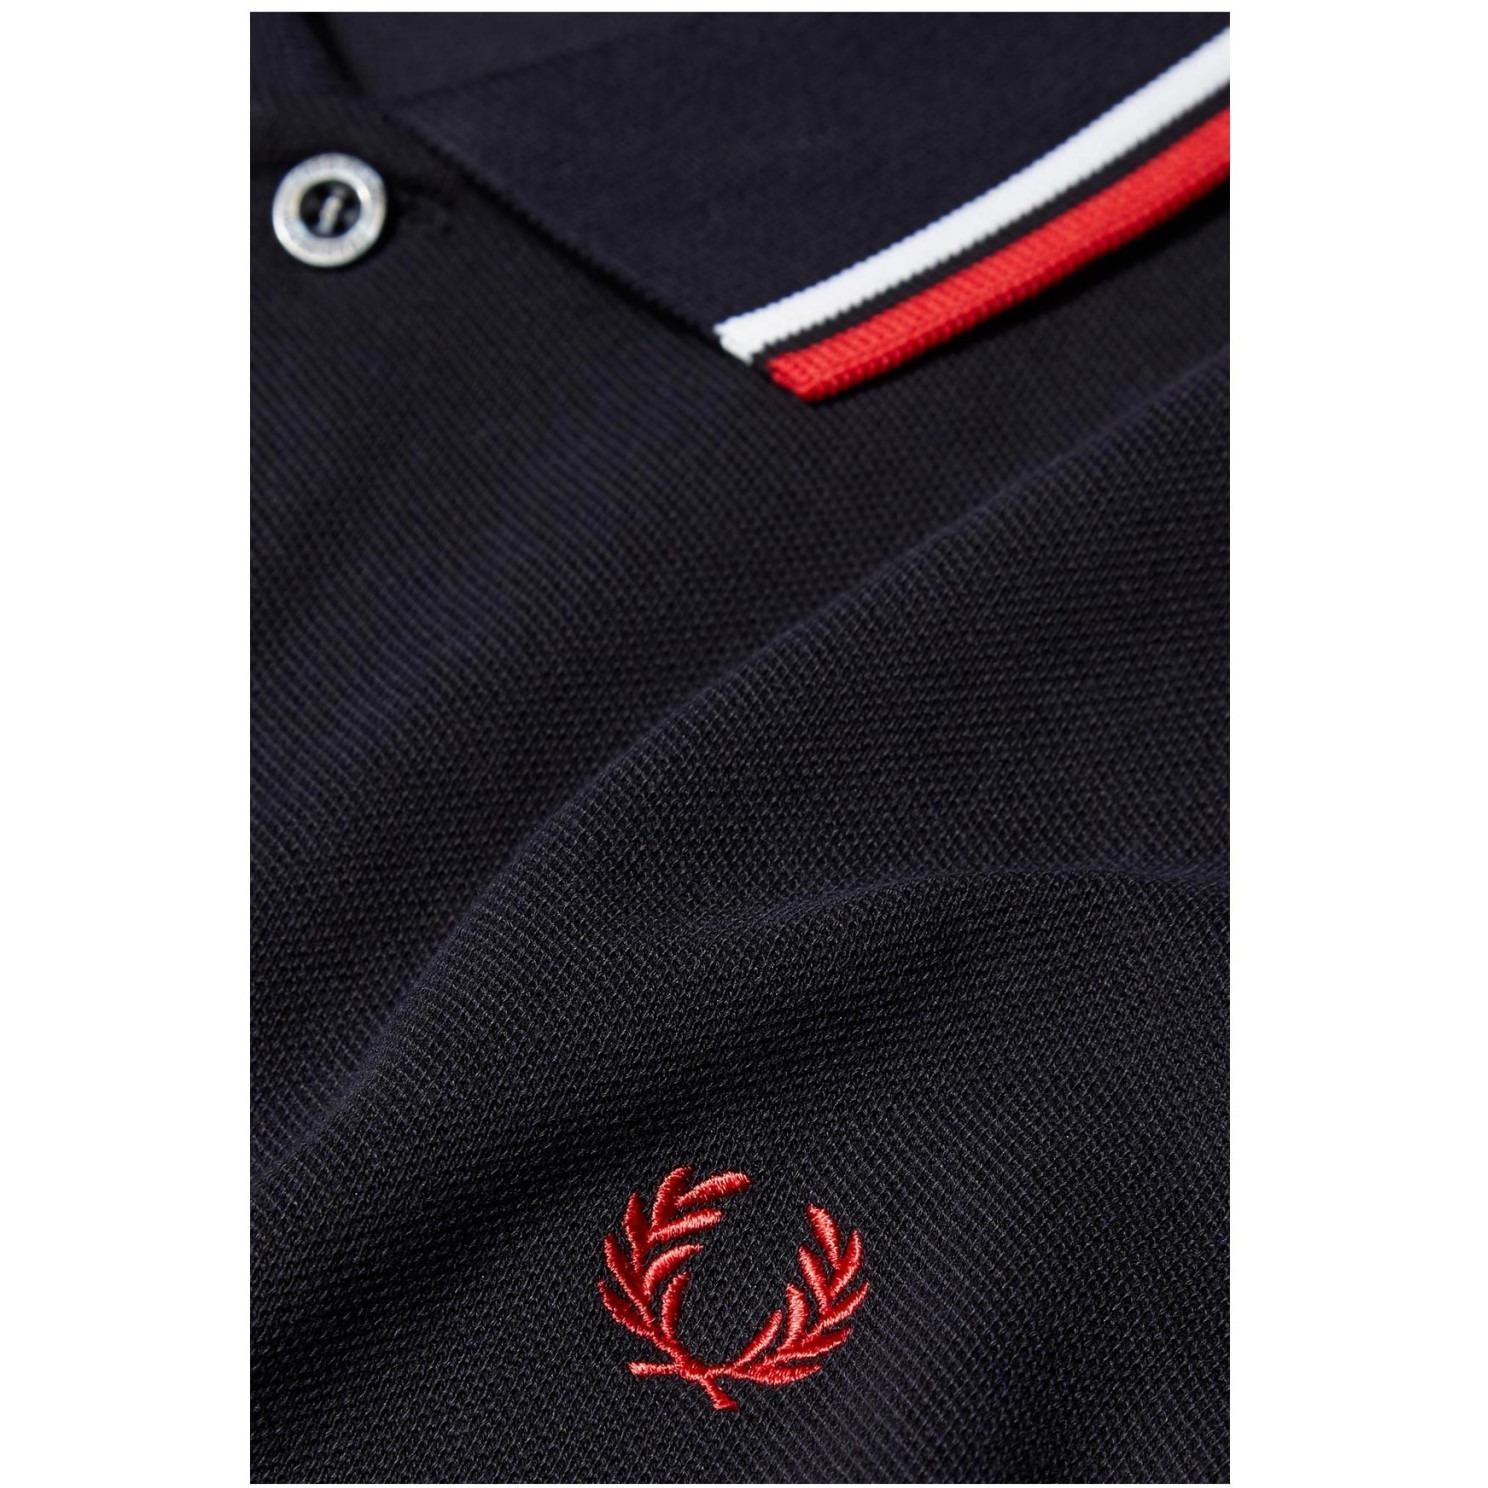 FRED PERRY TWIN TIPPED FRED PERRY SHIRT M1200-471 NAVY/WHITE.